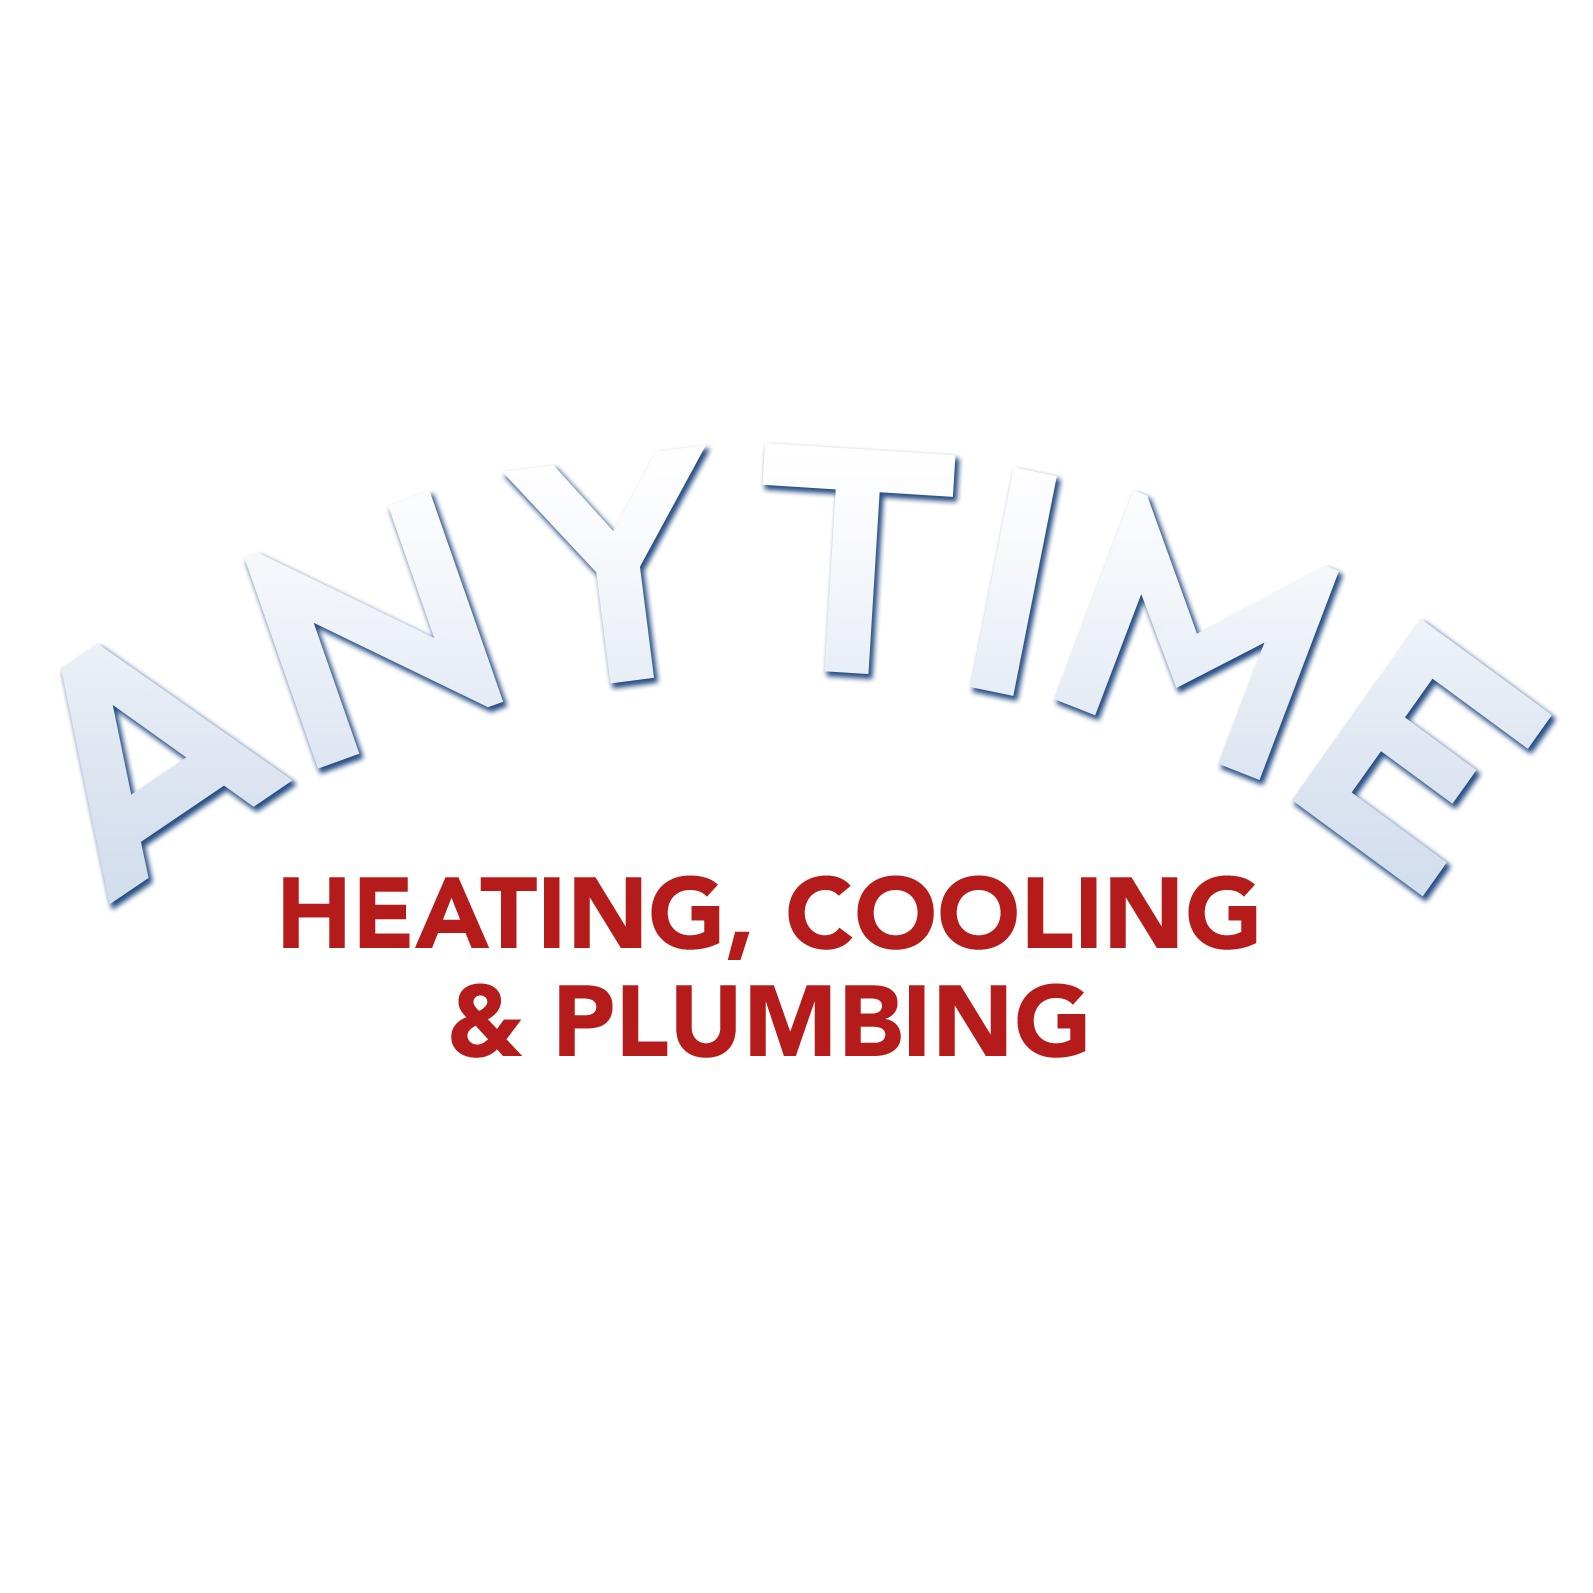 ANYTIME HEATING, COOLING AND PLUMBING - Alpharetta, GA - (770)504-5881 | ShowMeLocal.com